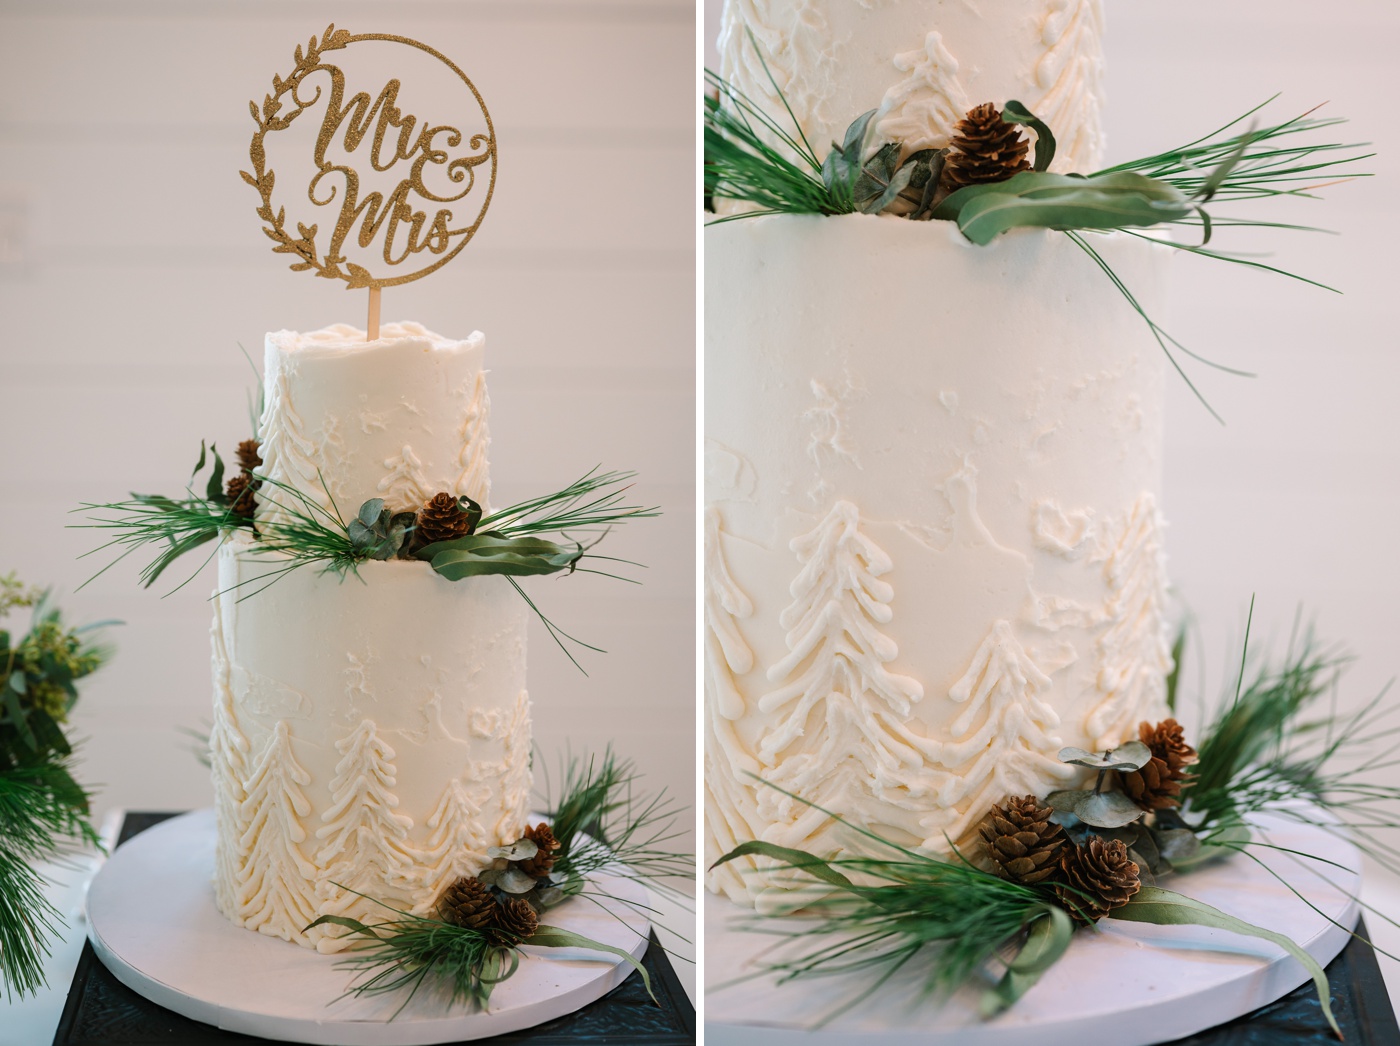 Wedding cake with pinecones and frosted Christmas trees by Farmhouse Cakes